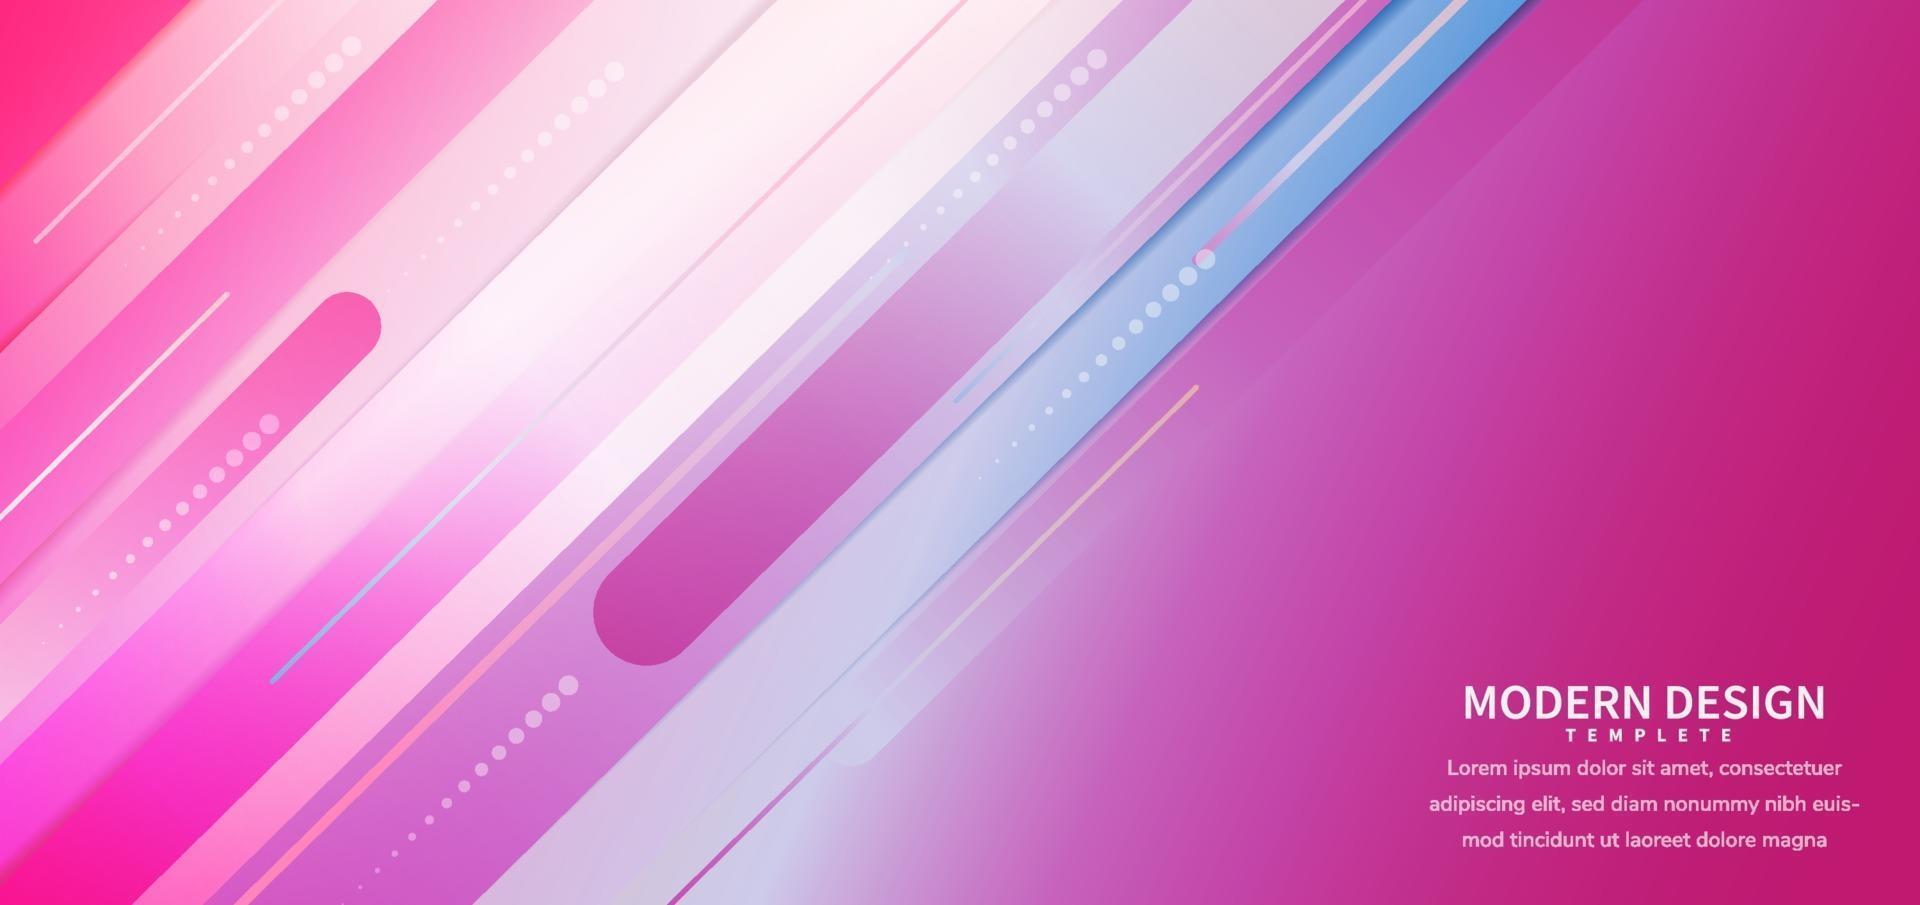 Abstract pink blue gradient diagonal geometric rounded shape overlapping background. Modern concept. vector